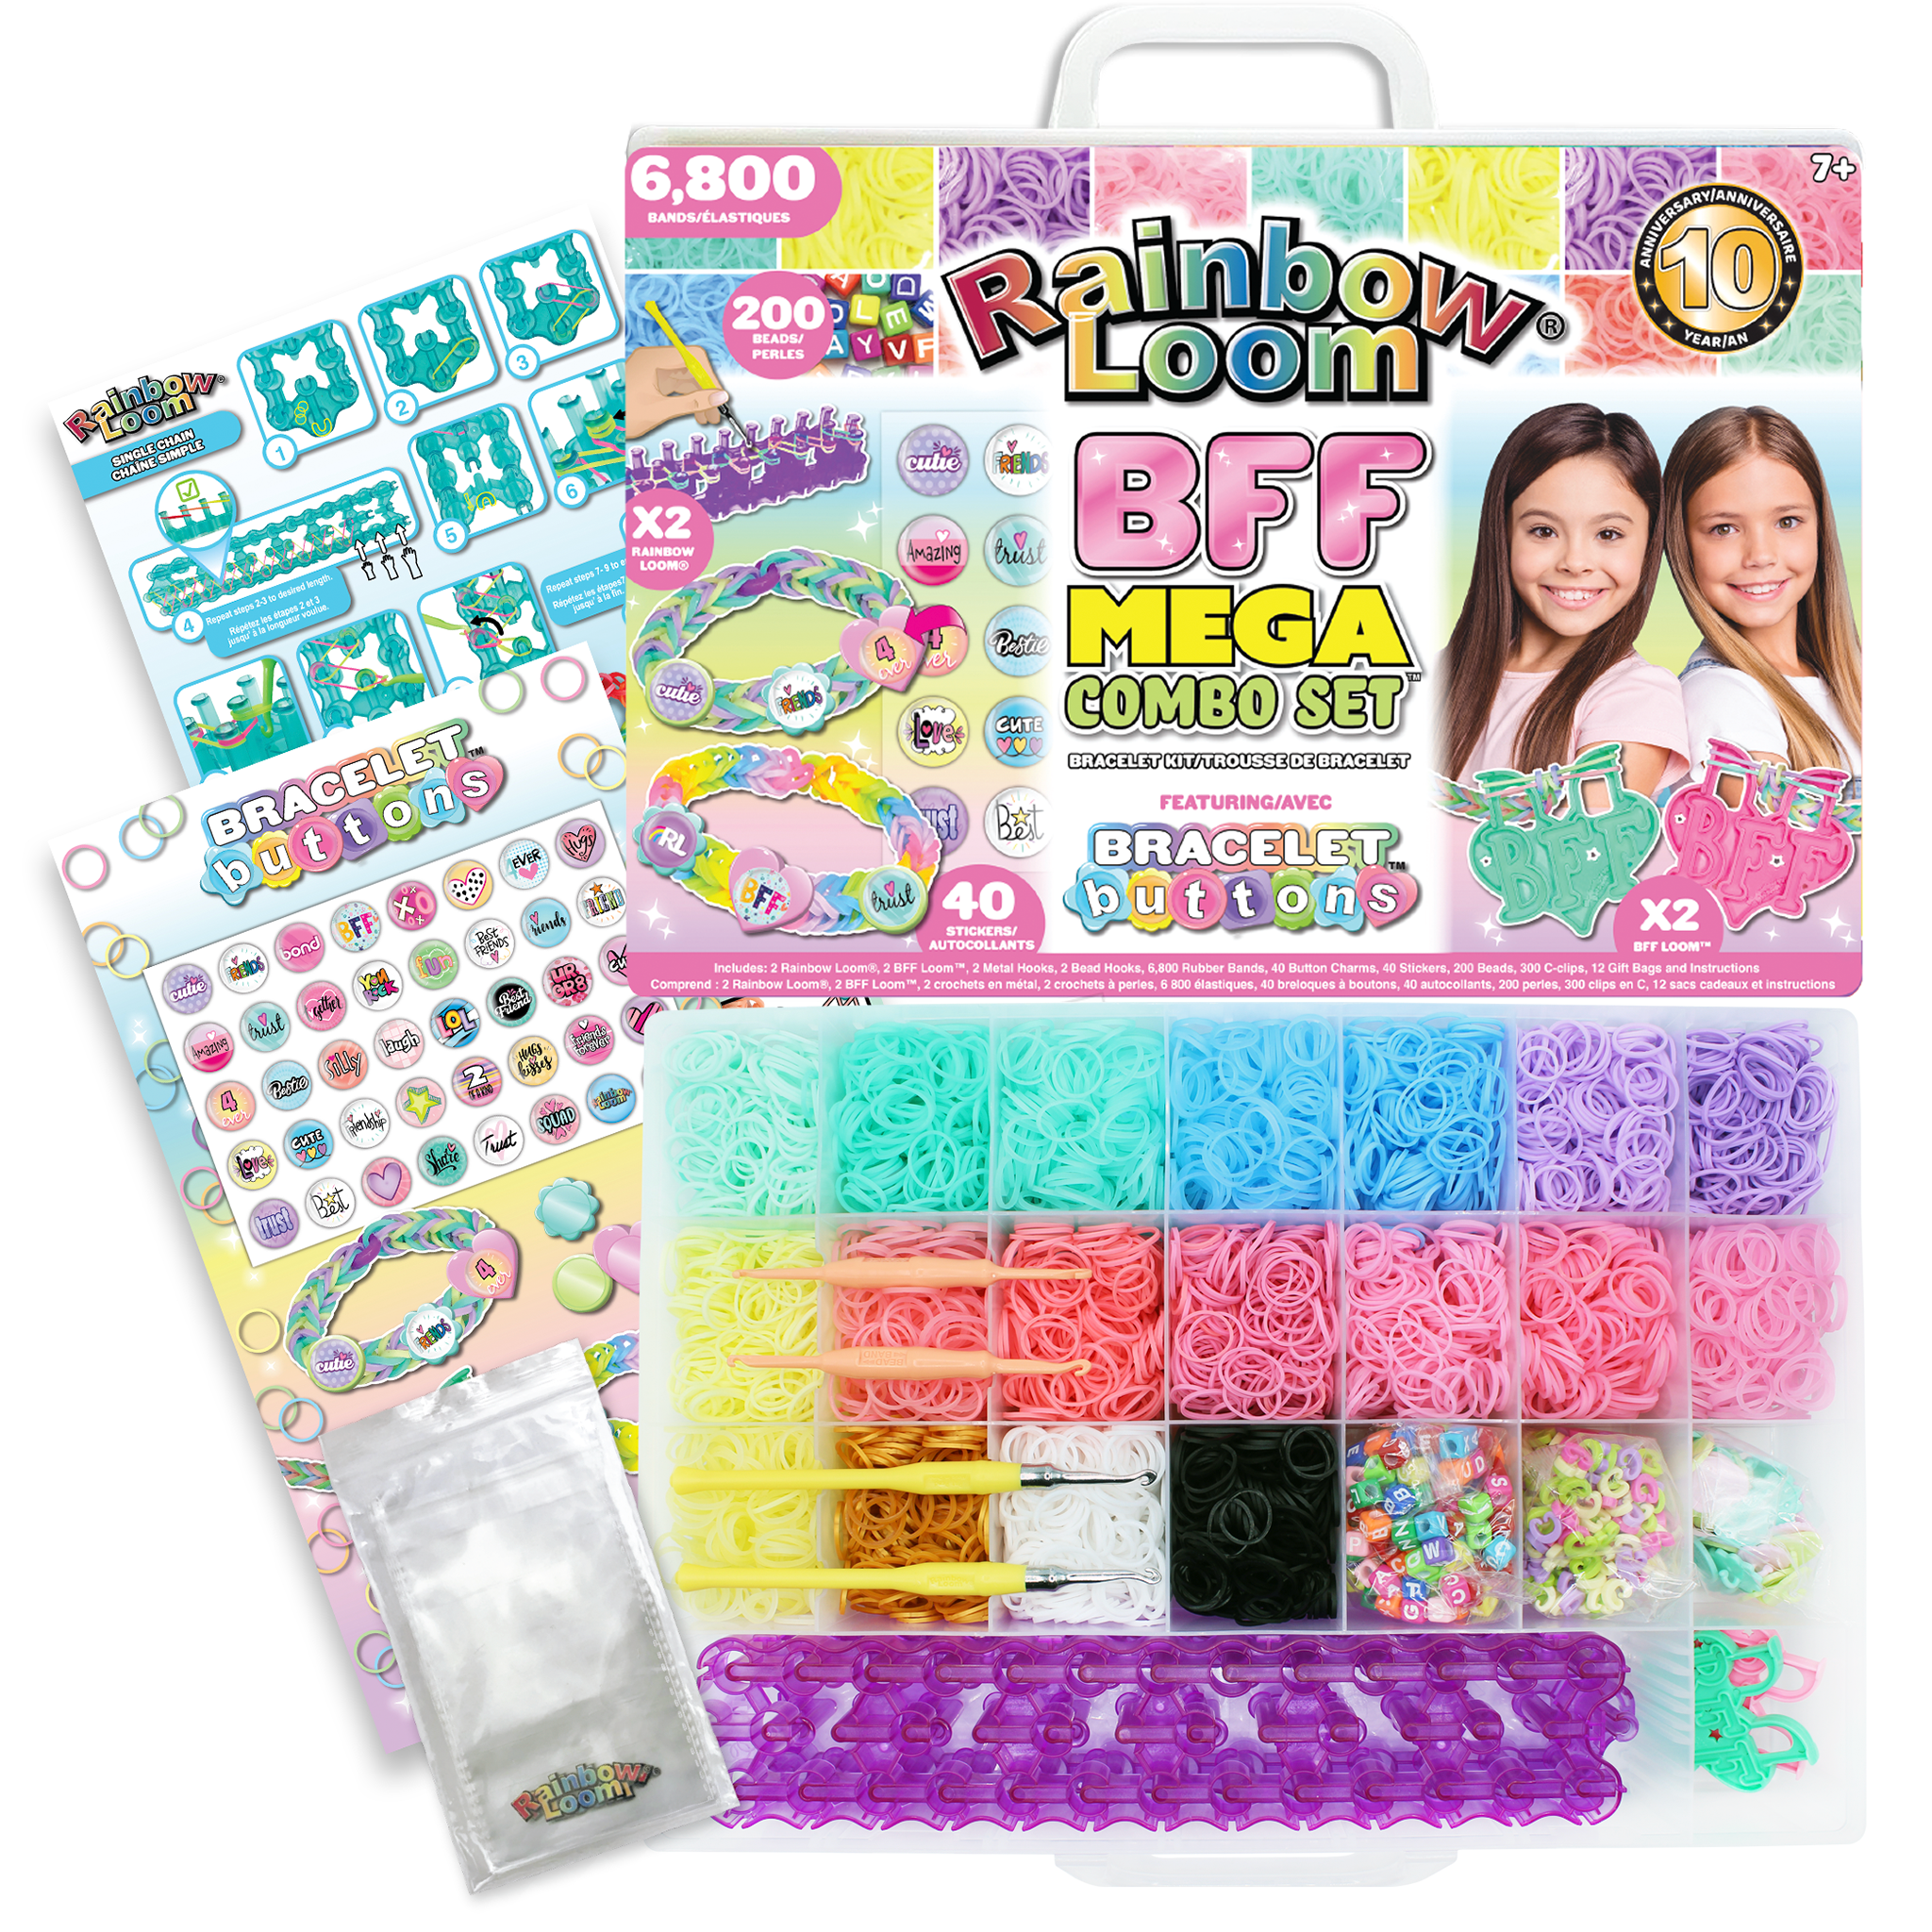  Rainbow Loom® MEGA Combo Set, Features 7000+ Colorful Rubber  Bands, 2 step-by-step Bracelet Instructions, Organizer Case, Great Gift for  Kids 7+ to Promote Fine Motor Skills